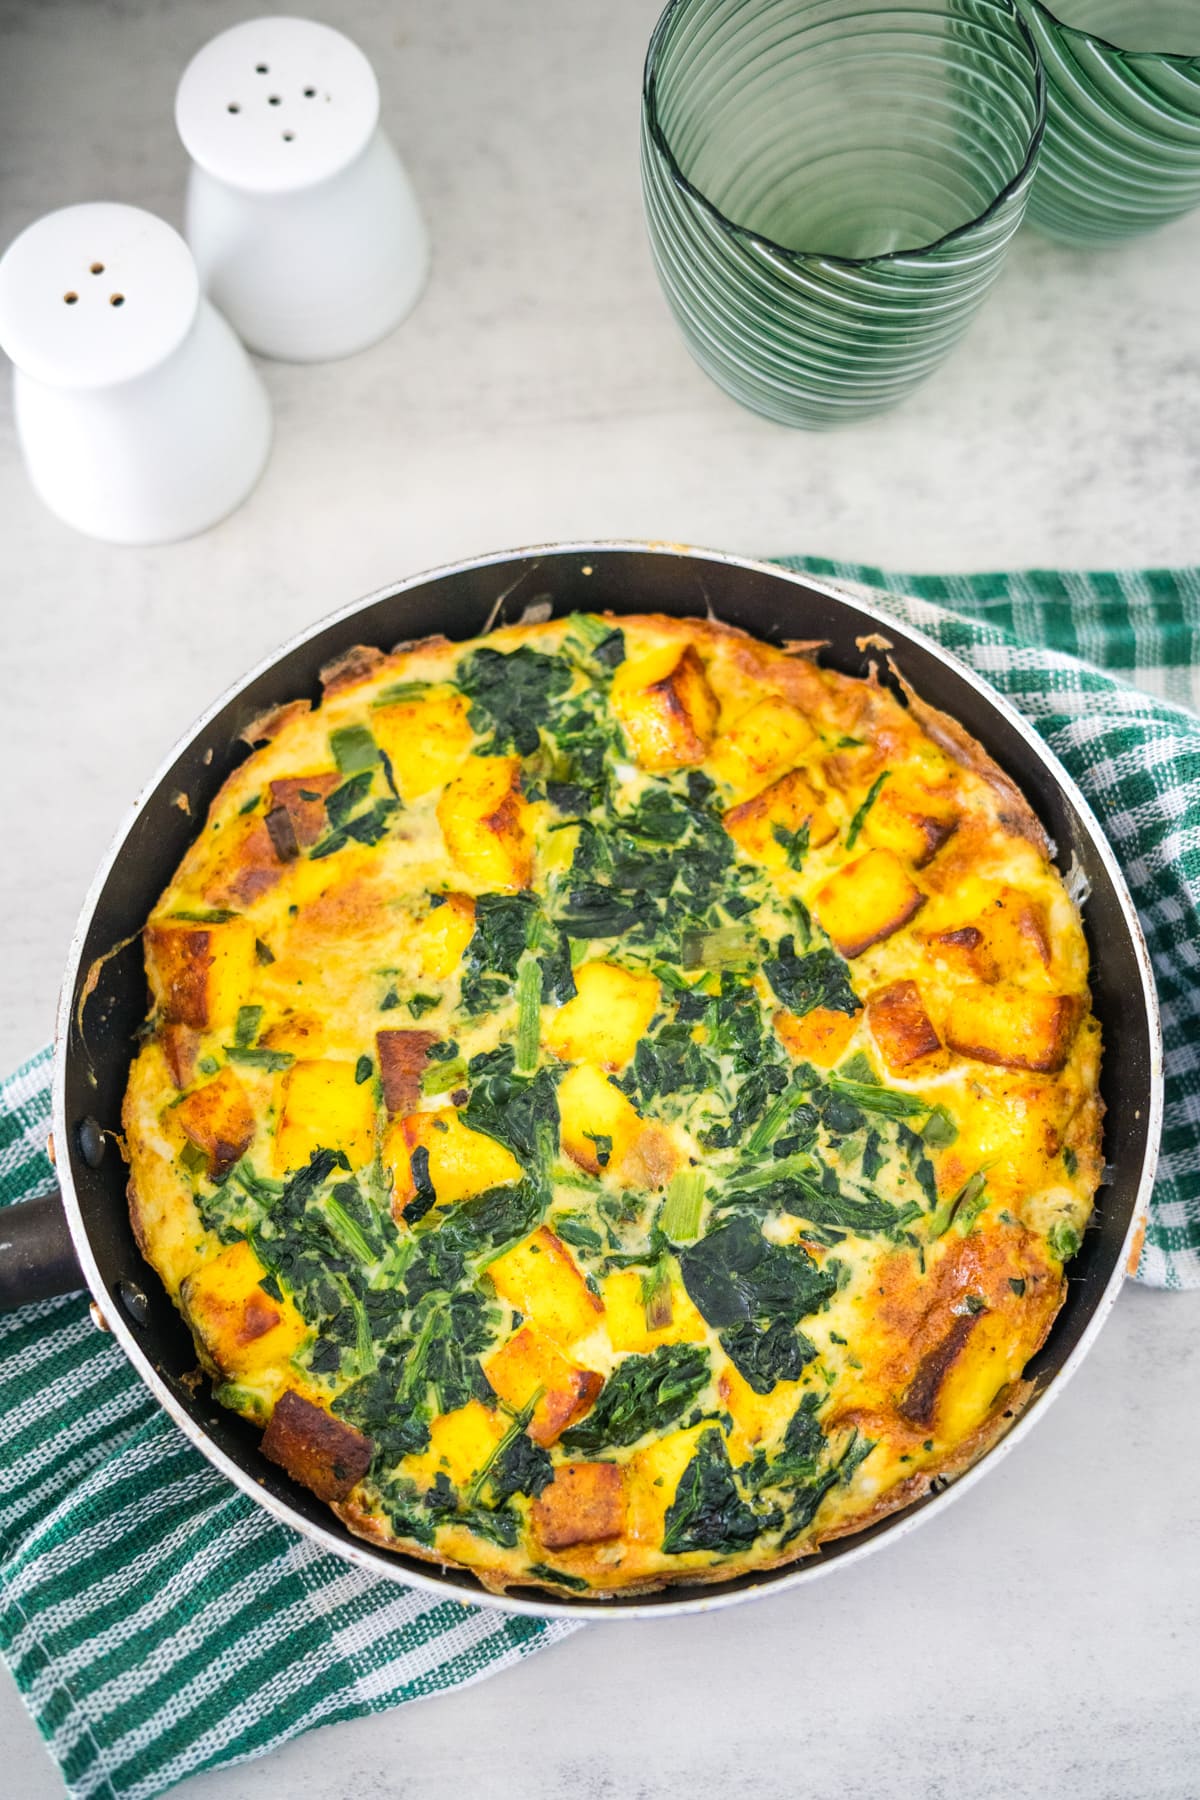 A skillet spinach and cheese quiche.